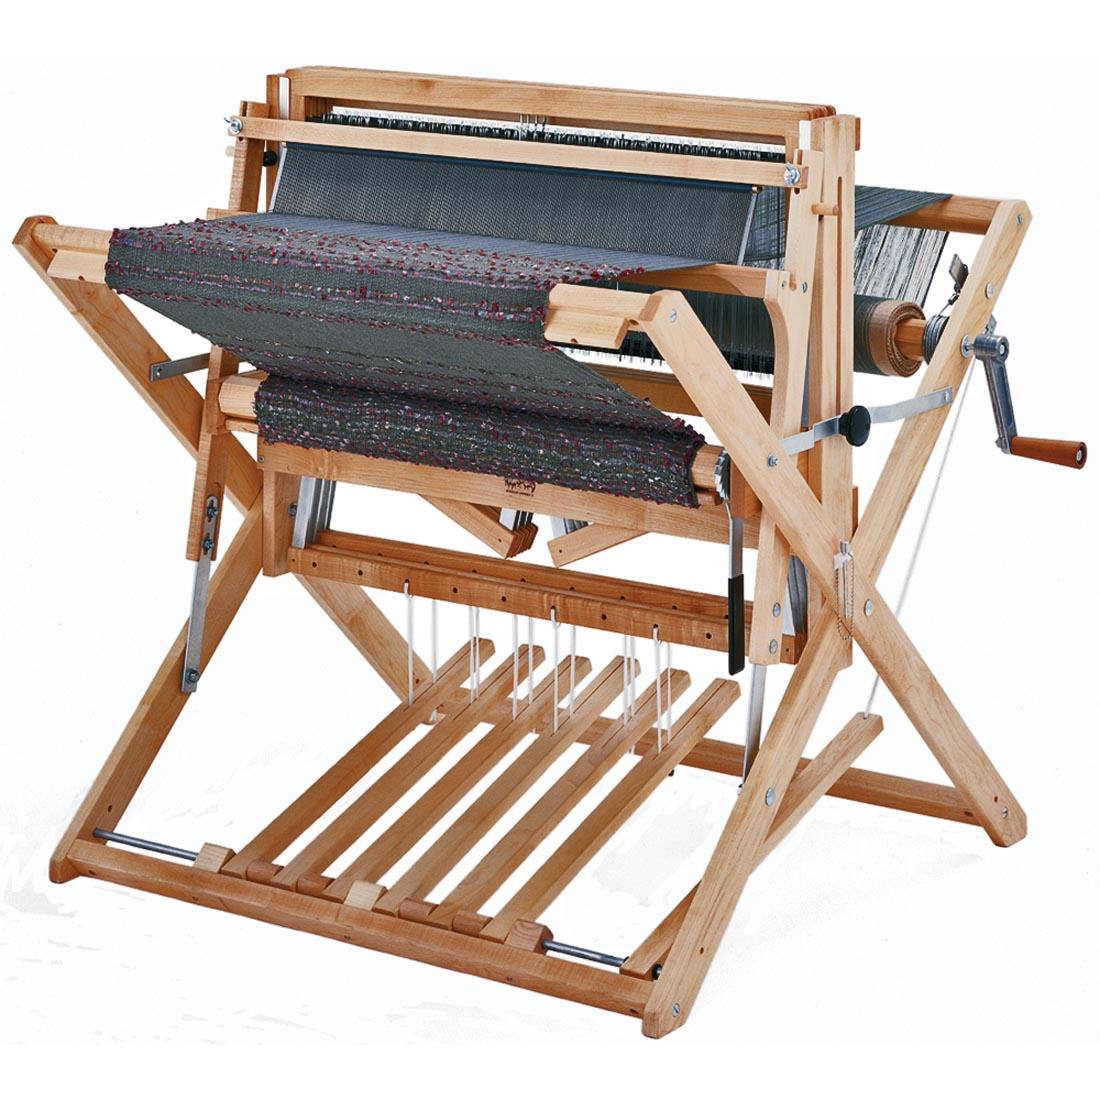 Schacht Spindle Co. 4-Shaft Baby Wolf Loom shown with a weaving already on it